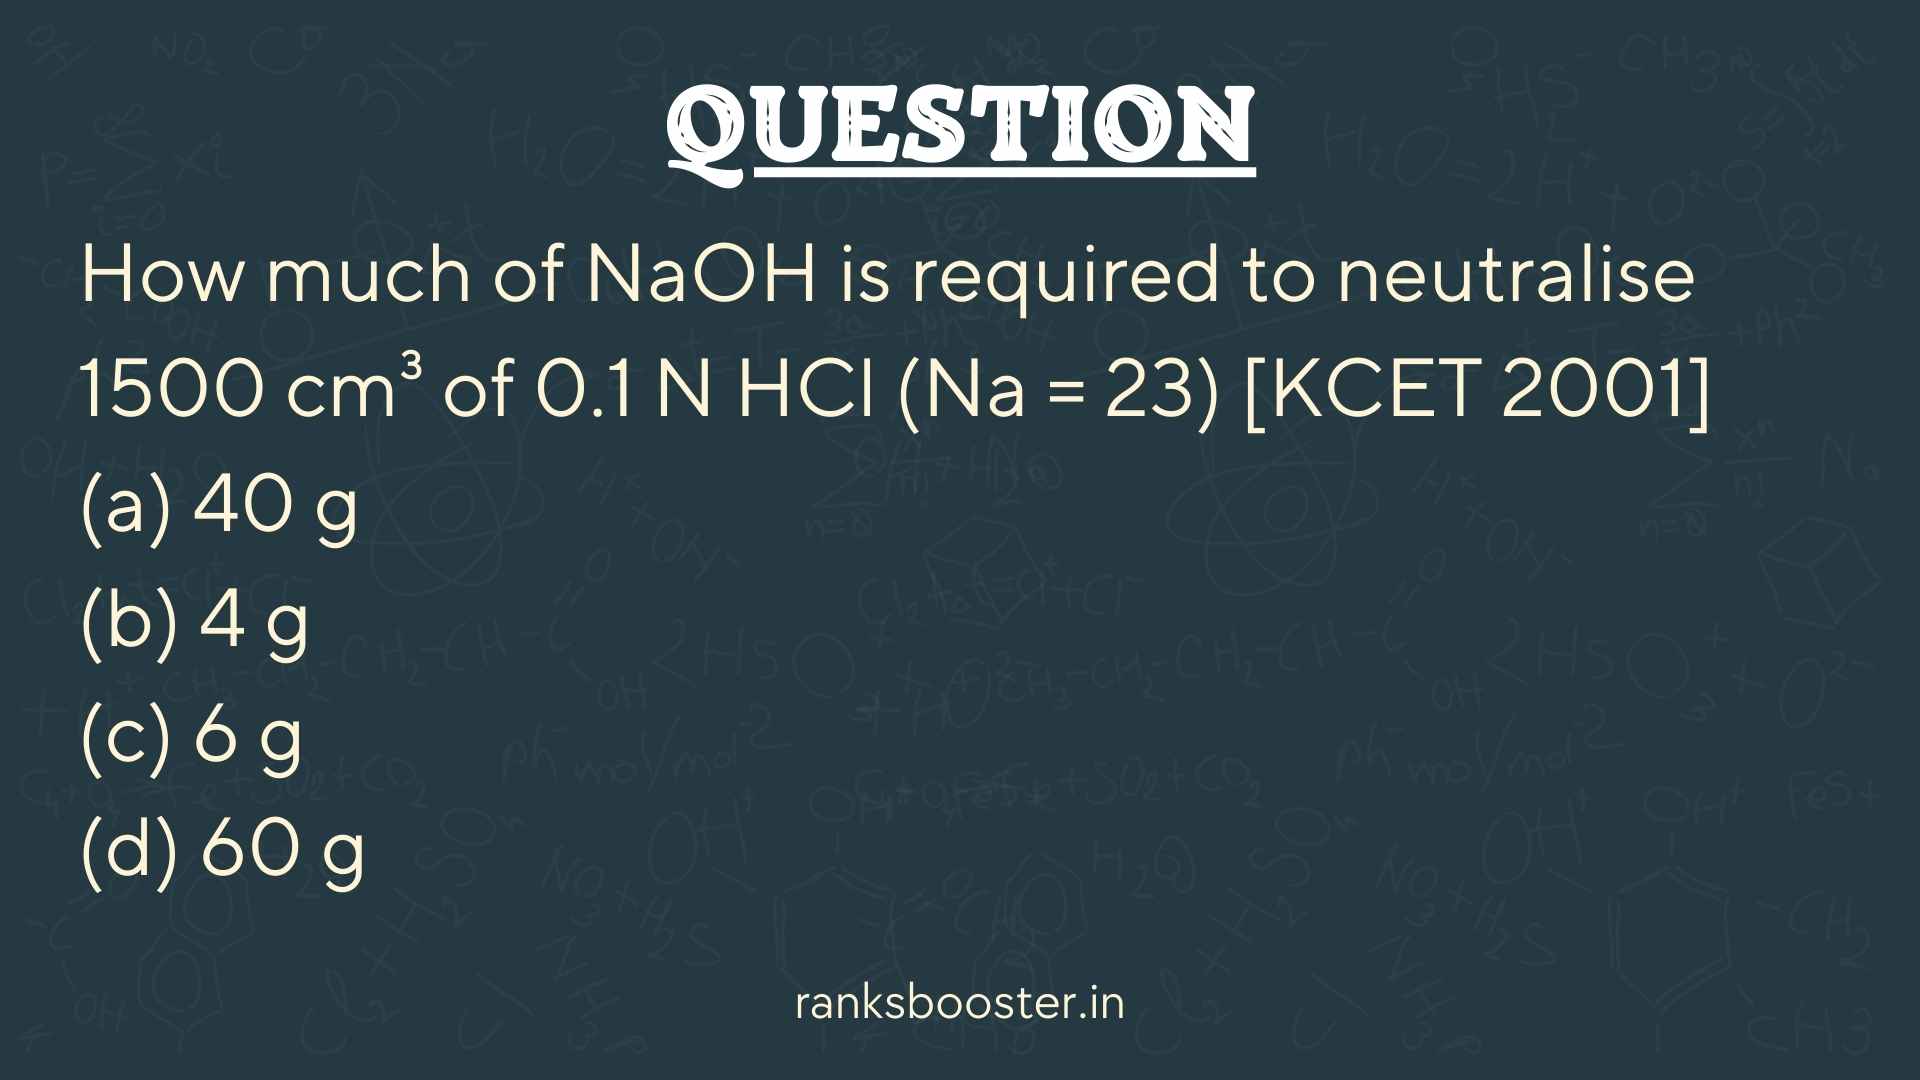 Question: How much of NaOH is required to neutralise 1500 cm³ of 0.1 N HCl (Na = 23) [KCET 2001] (a) 40 g (b) 4 g (c) 6 g (d) 60 g